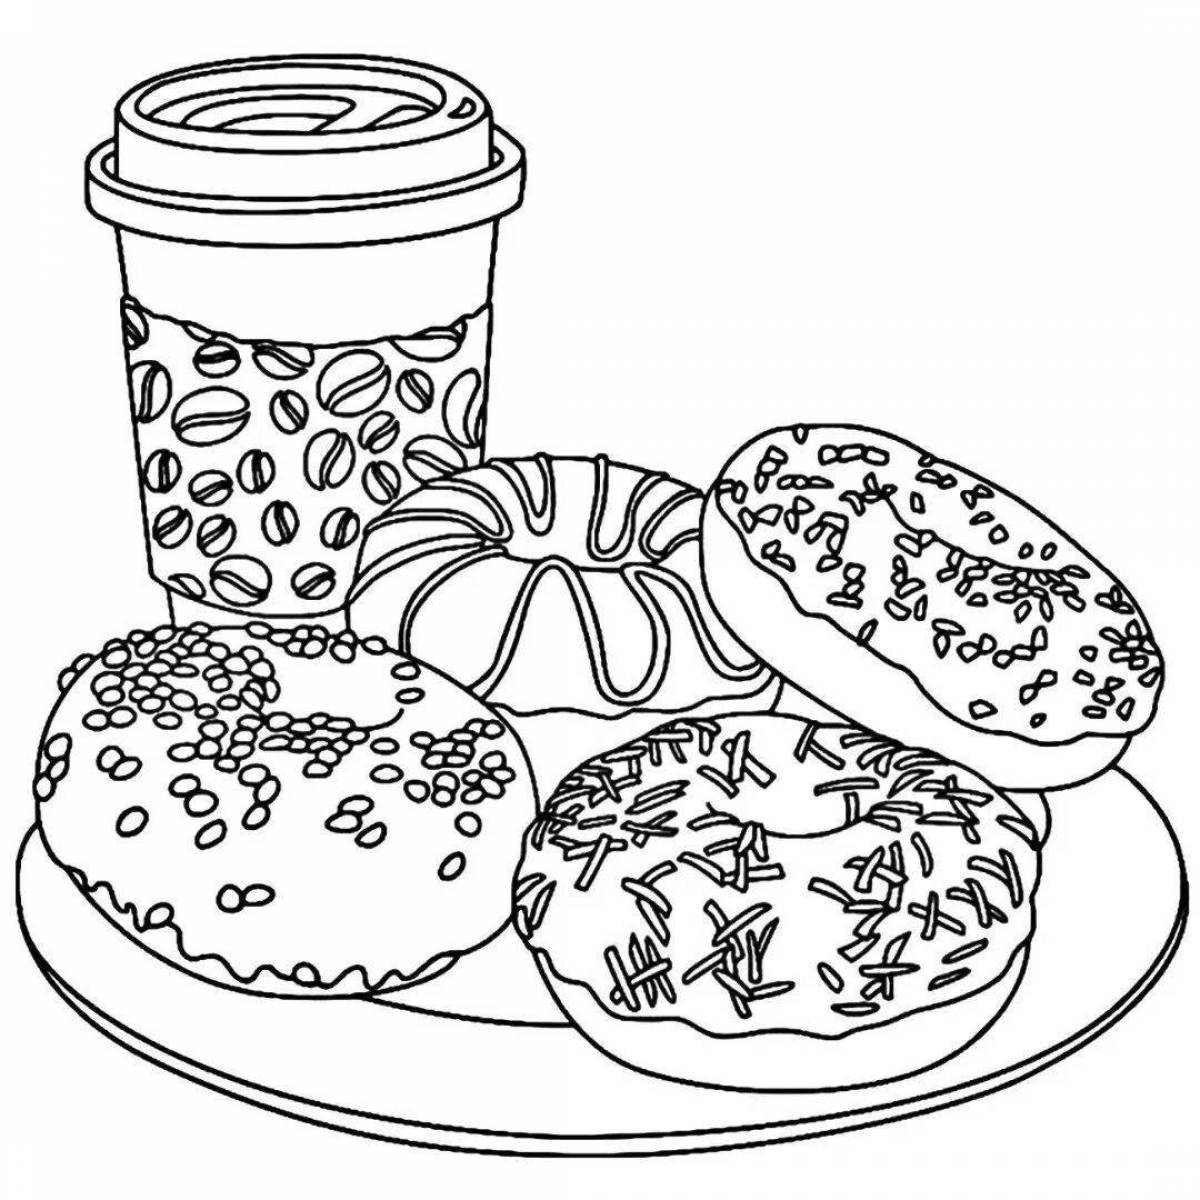 Adorable donut coloring for girls